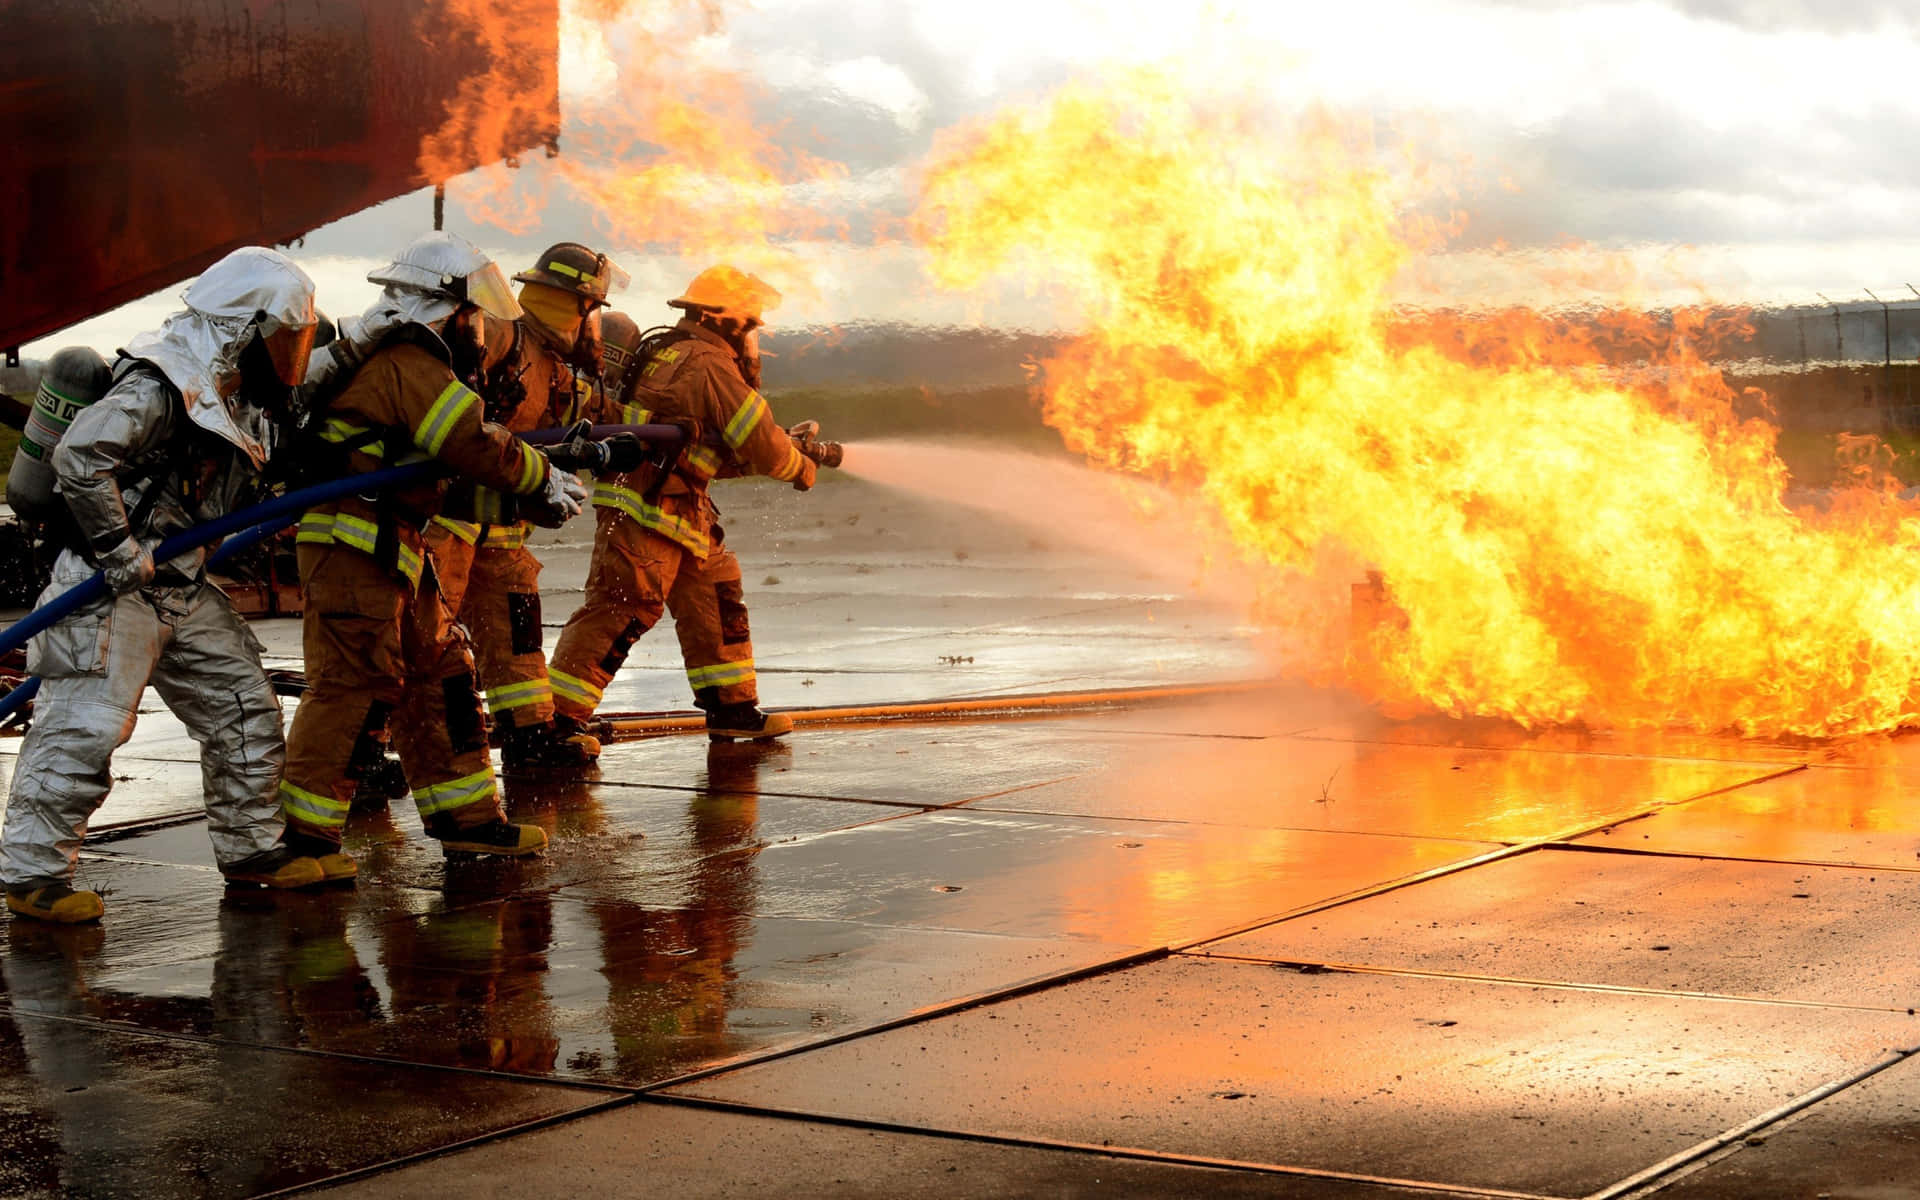 A Group Of Firefighters Are Battling A Fire Wallpaper